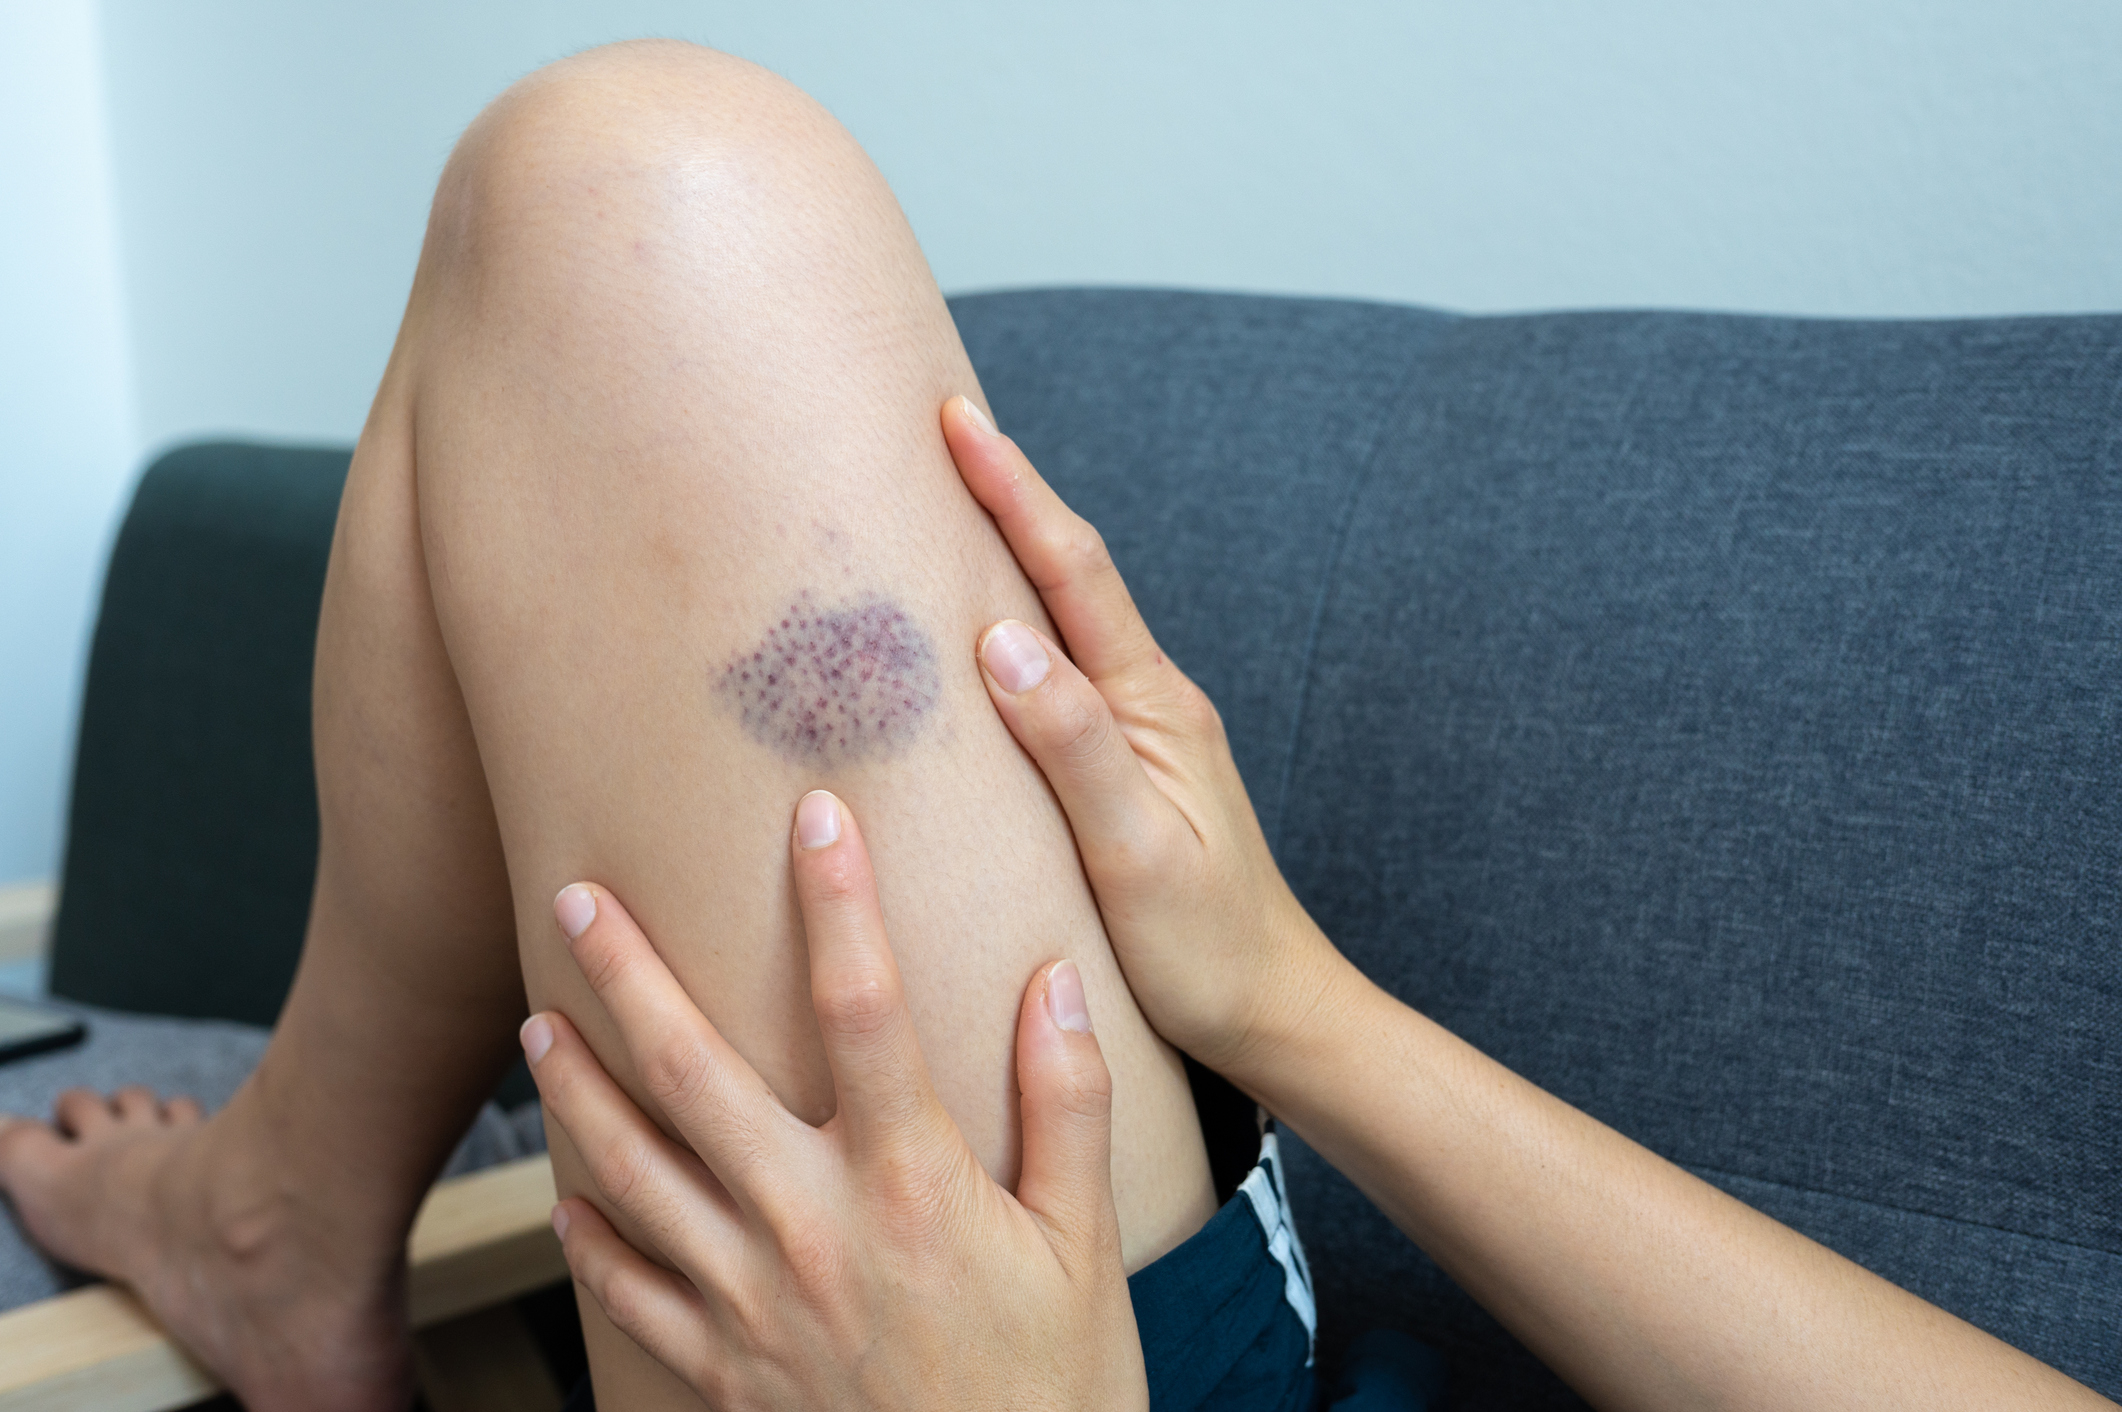 Person examining a bruise on their leg while sitting on a sofa